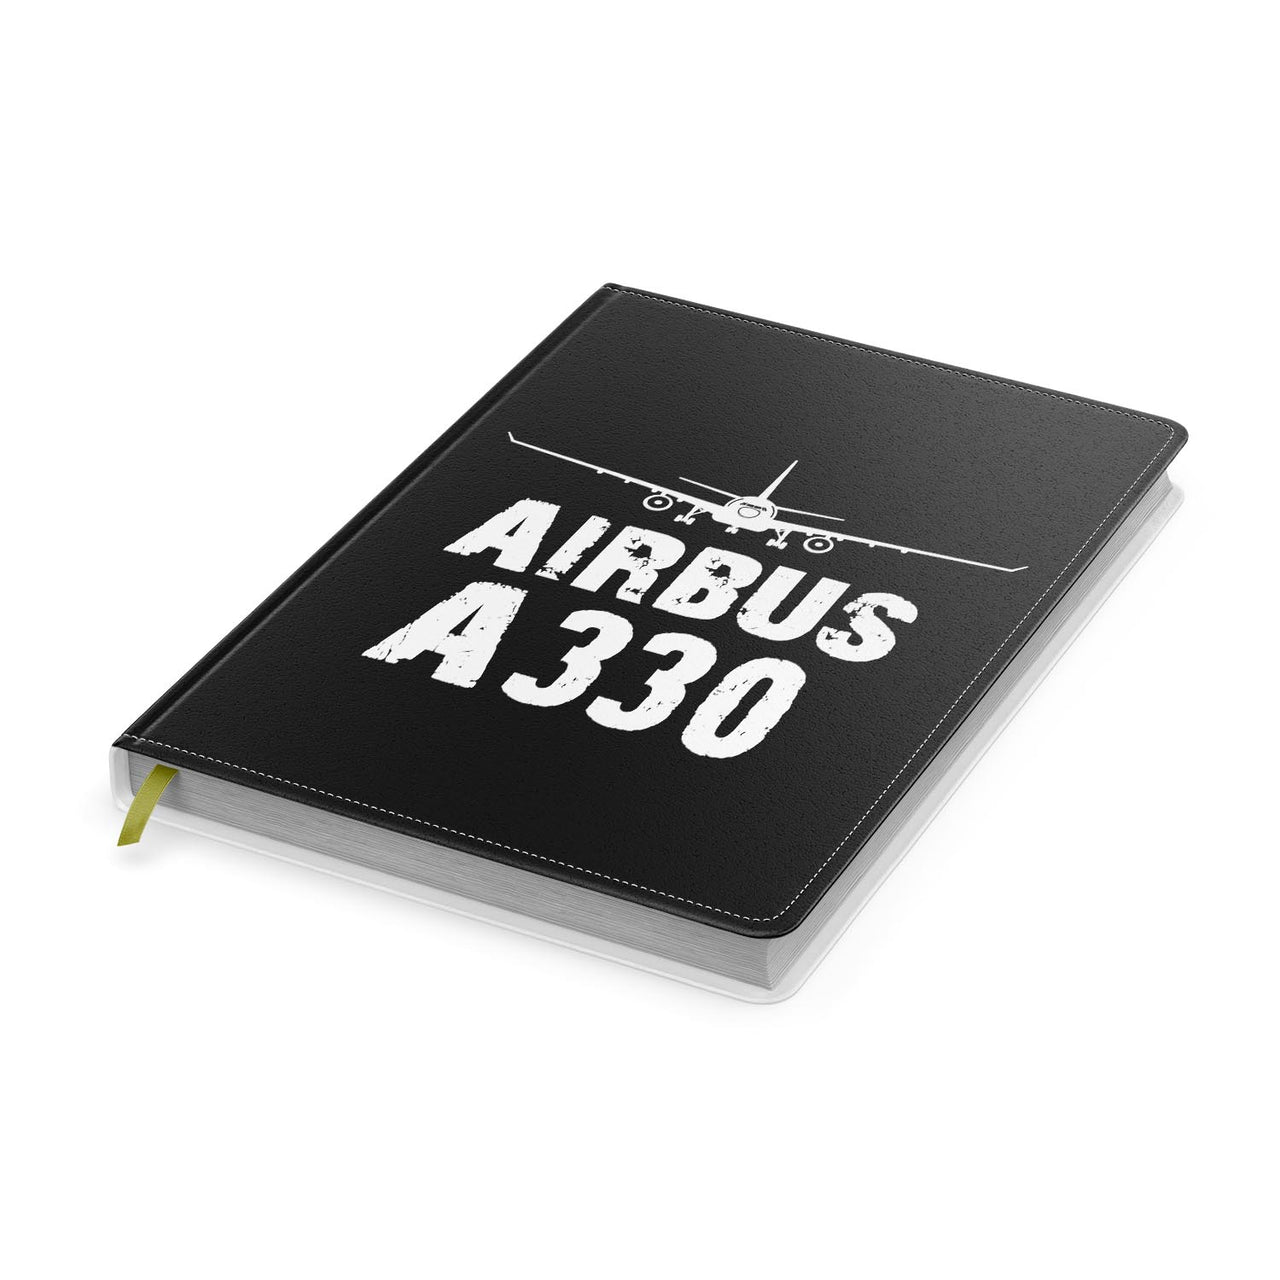 Airbus A330 & Plane Designed Notebooks